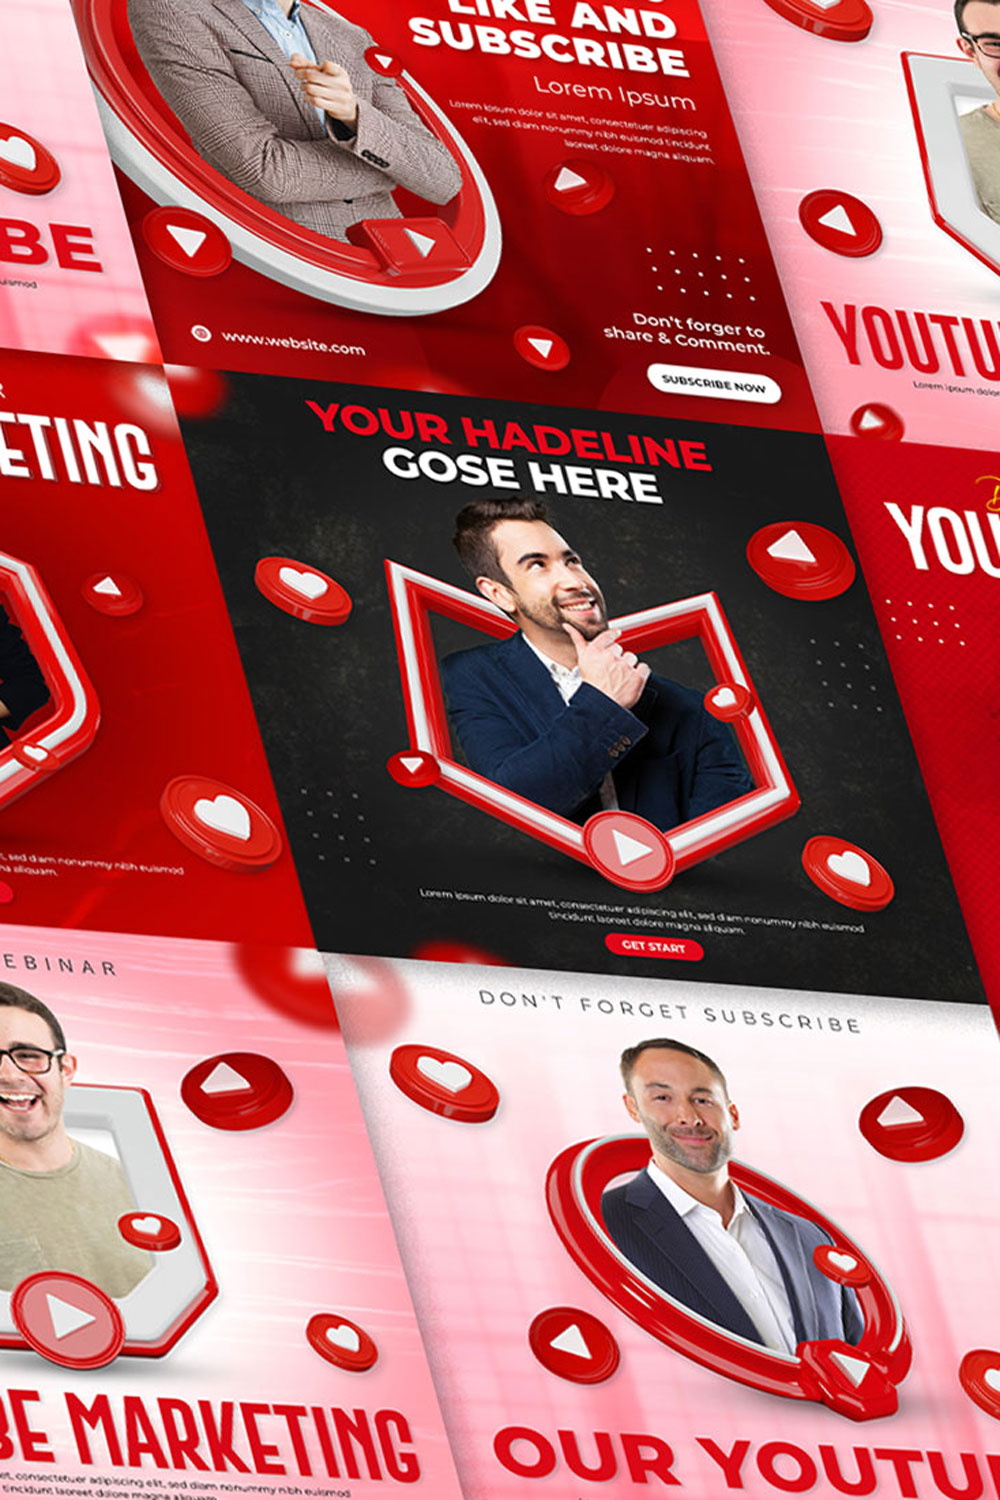 Youtube marketing social media promotion post template set pinterest preview image.